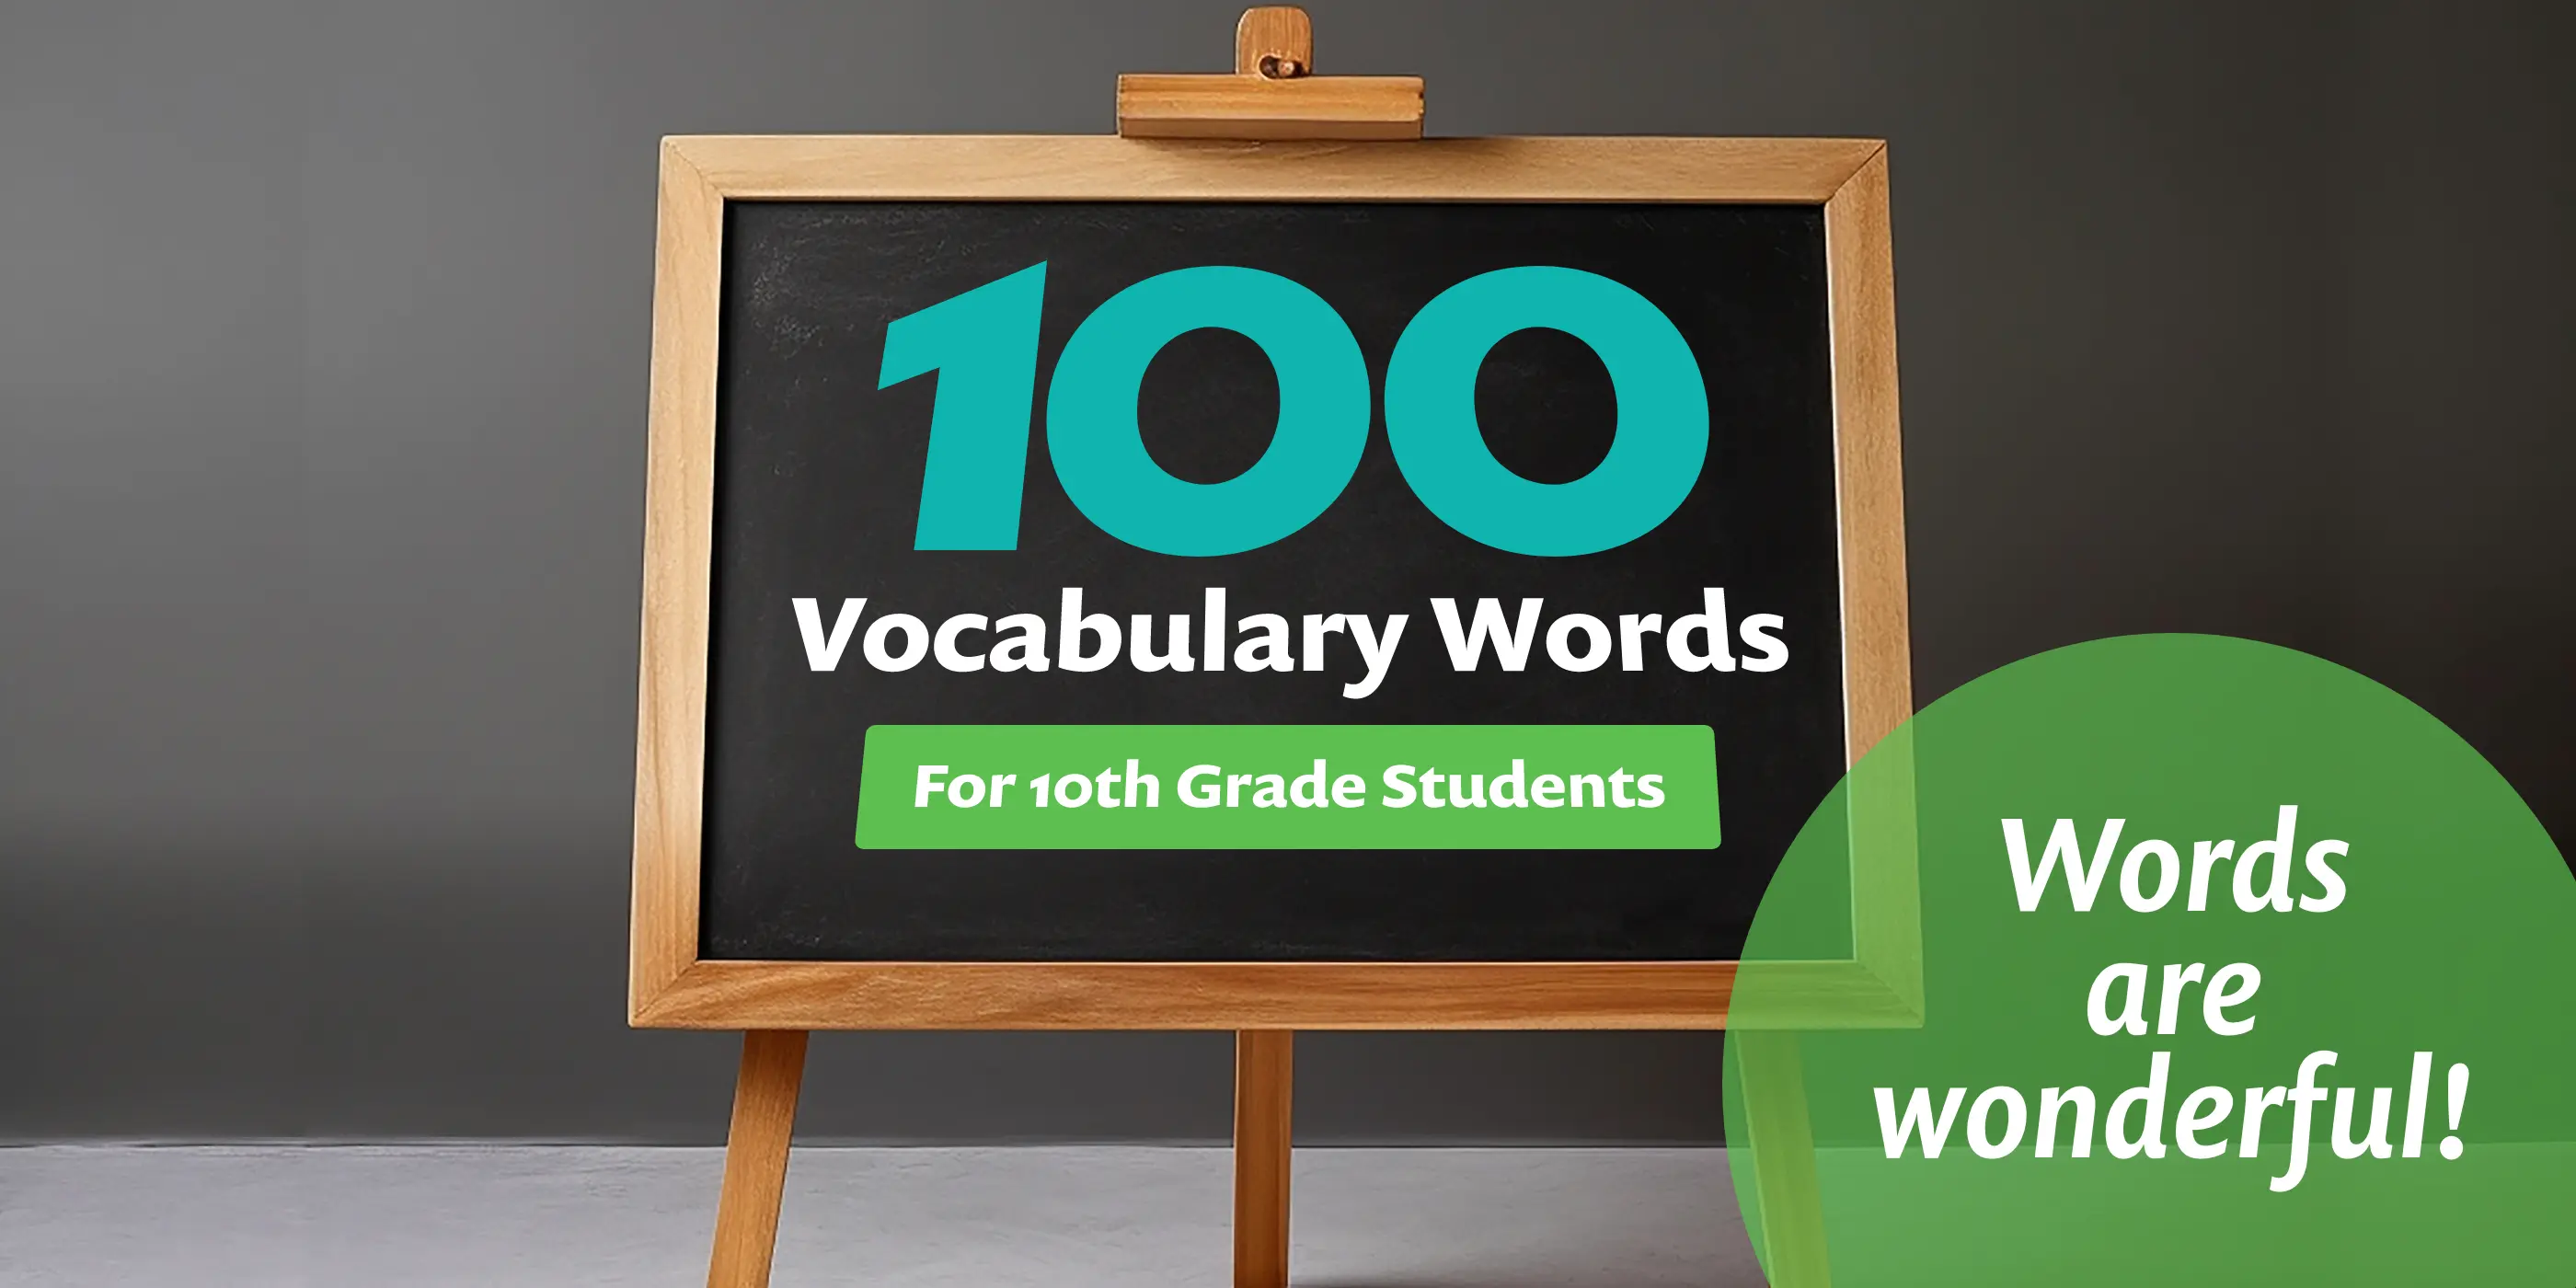 100 Vocabulary Words for 10th Grade Students